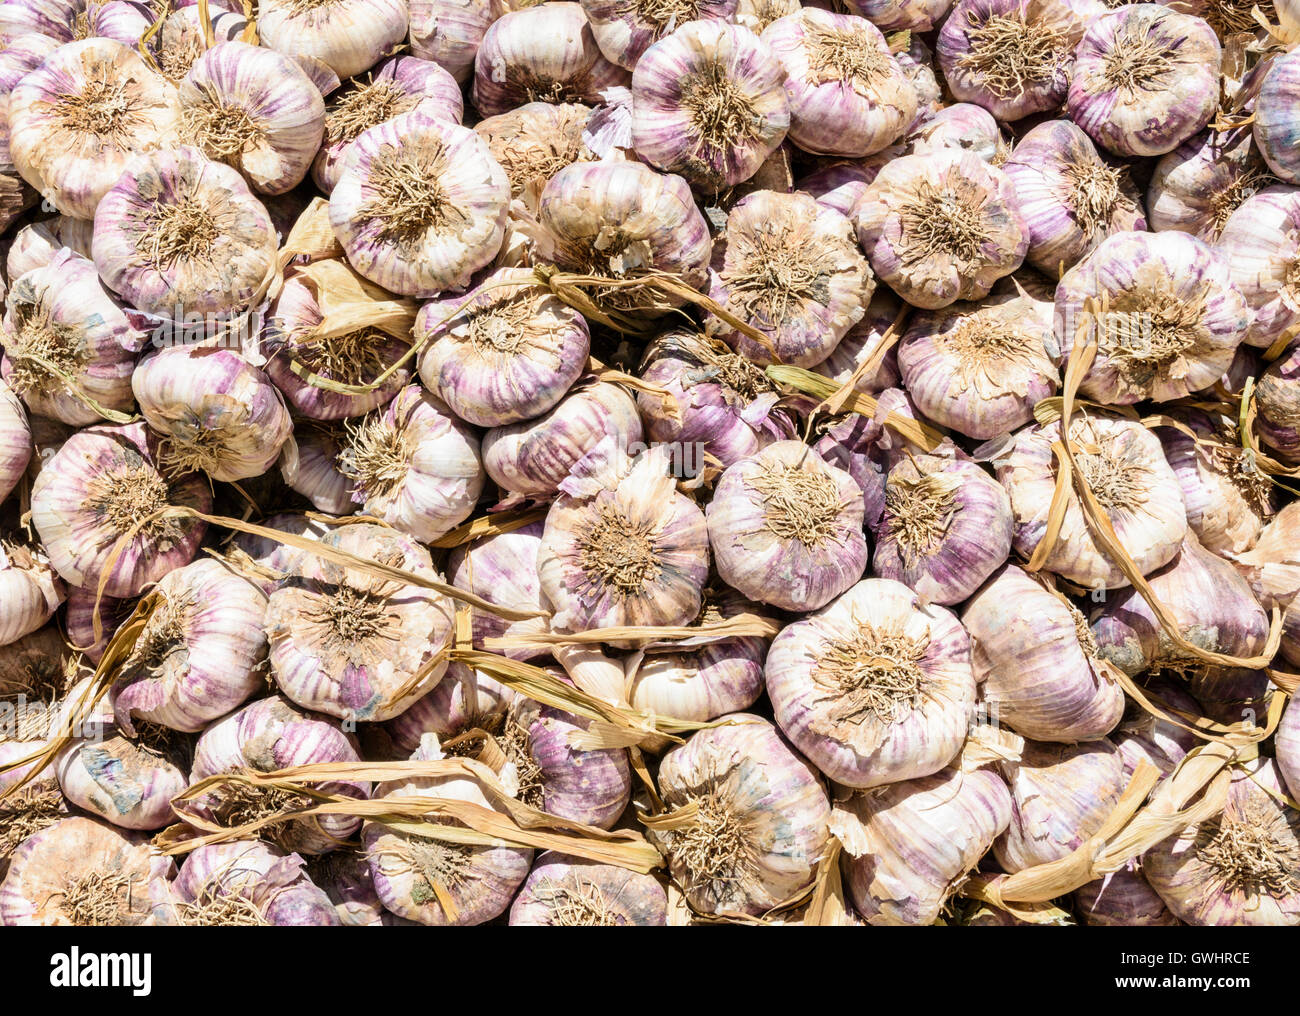 French violet garlic bulbs stacked in a pile at Saintes-Maries-de-la-Mer market in France Stock Photo